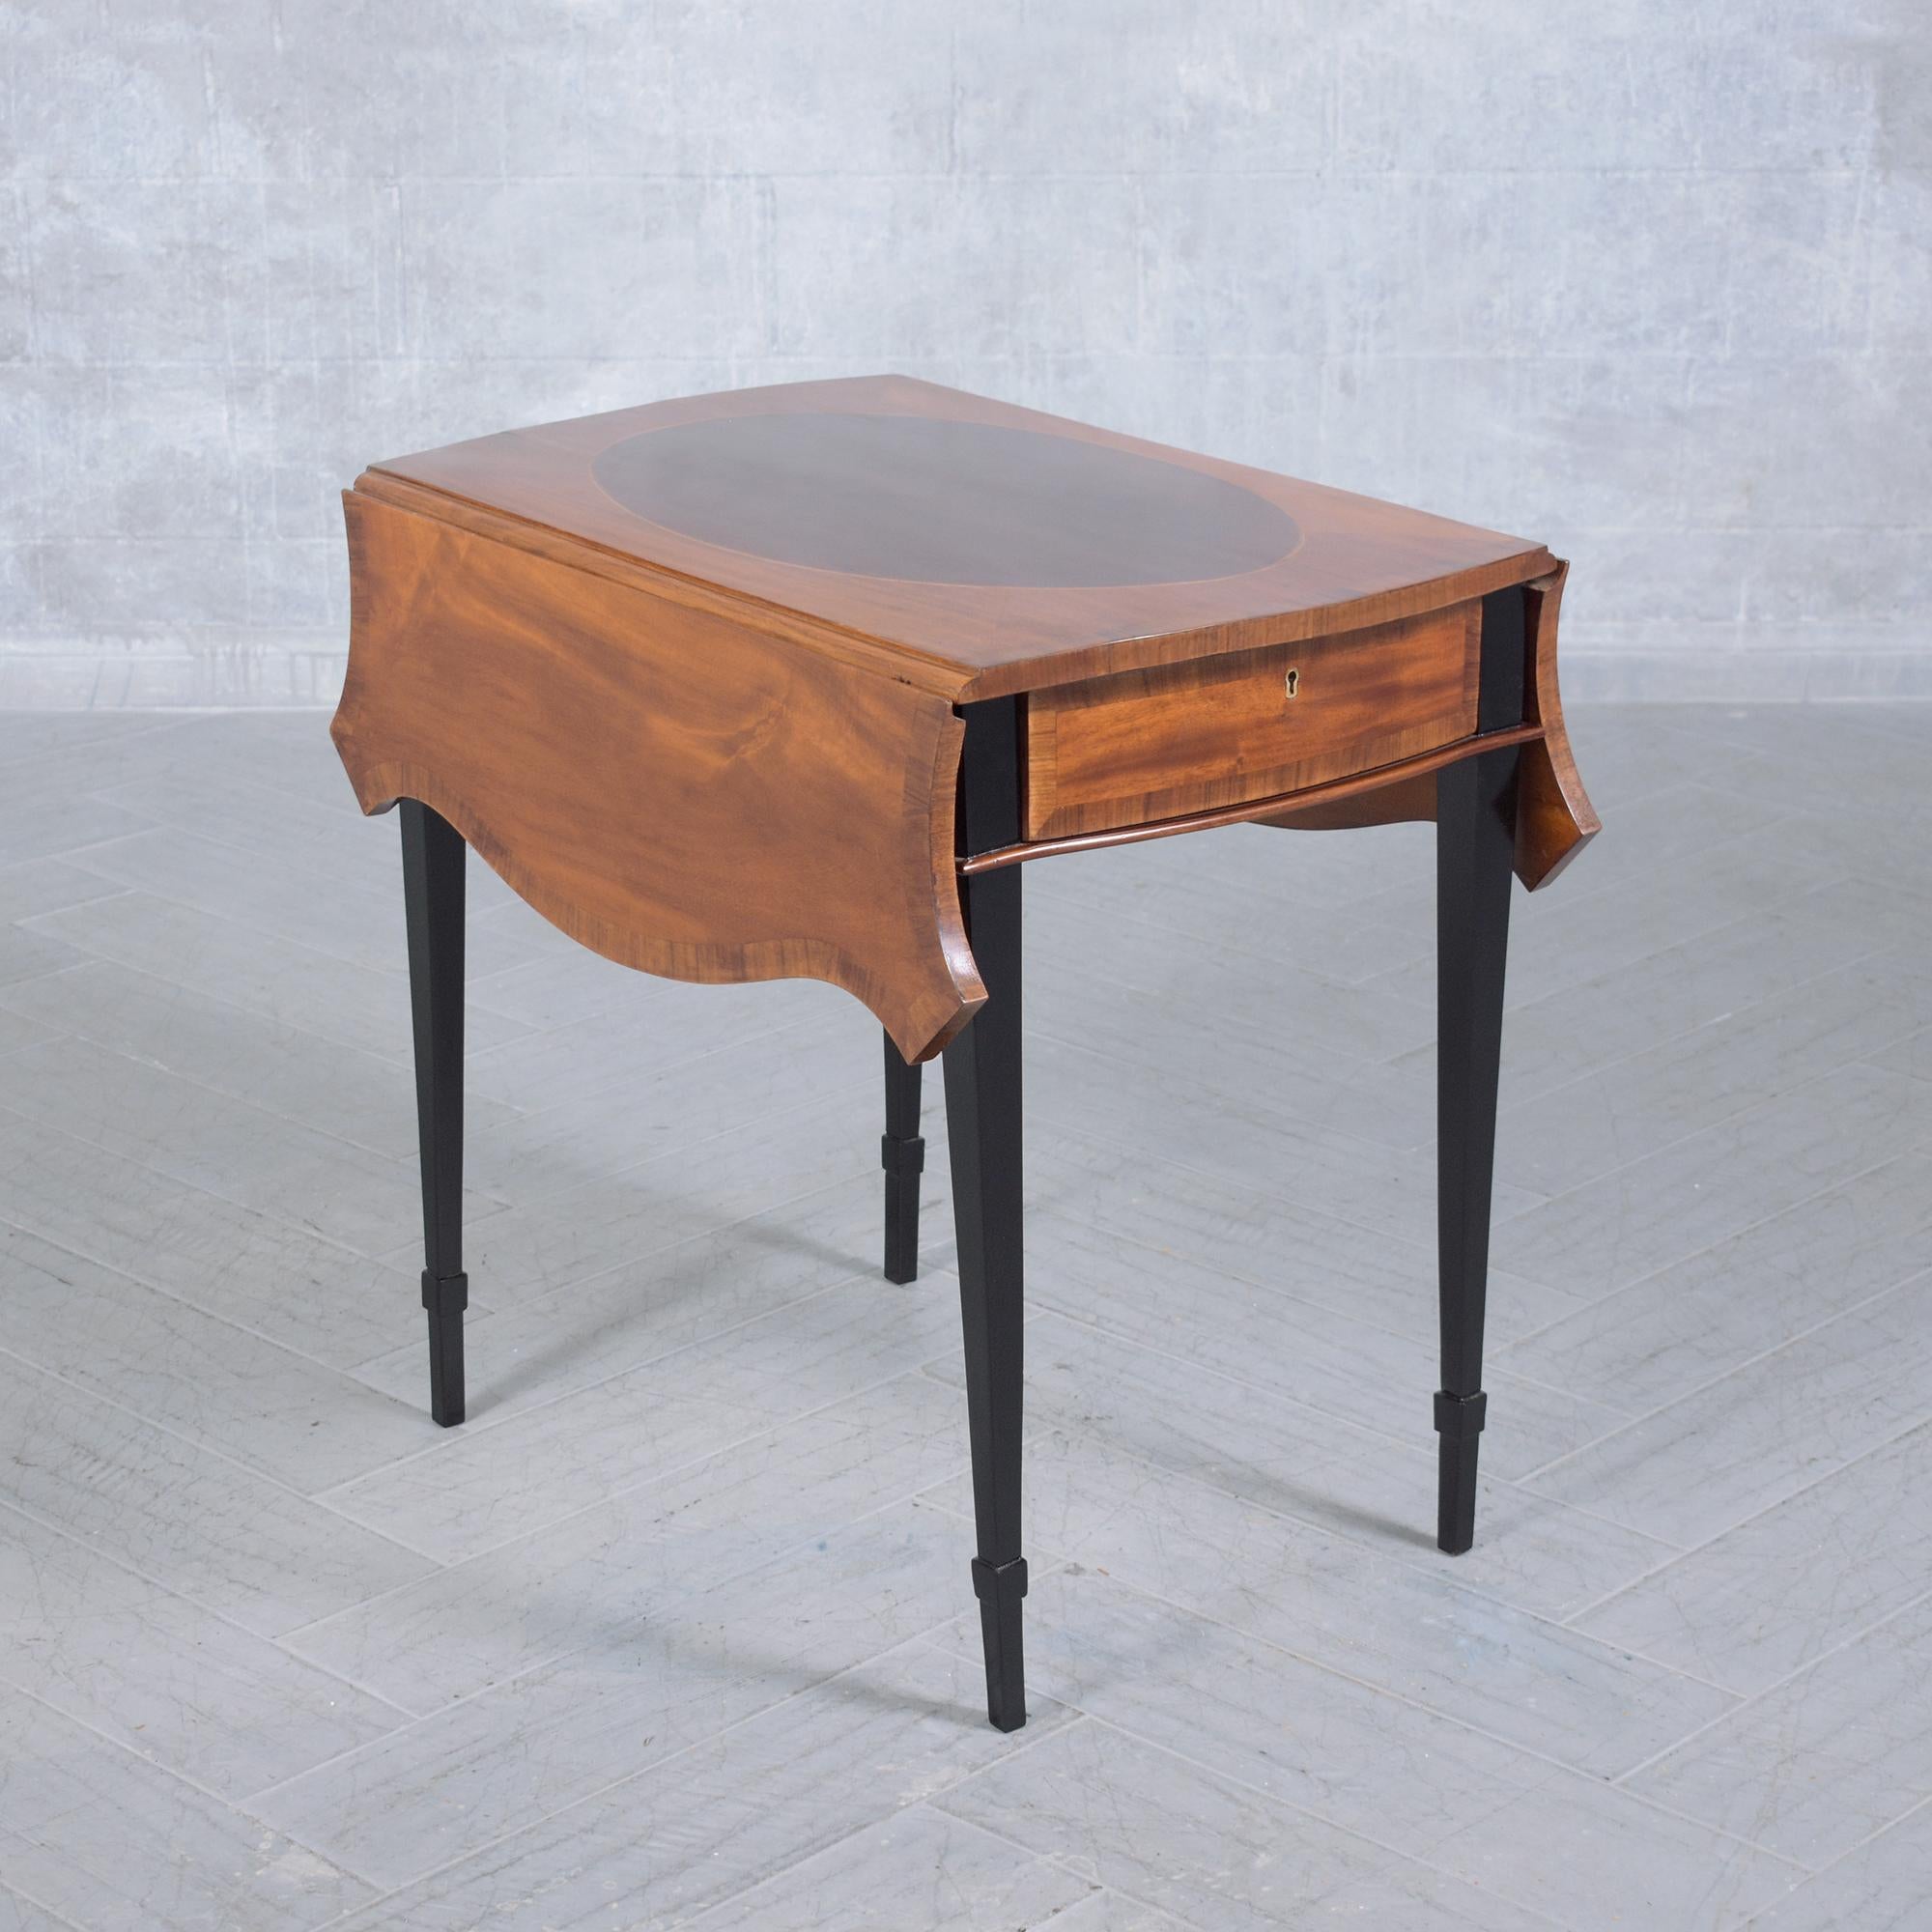 Late 19th-Century Mahogany Pembroke Table with Plume Inlays & Brass Casters For Sale 5